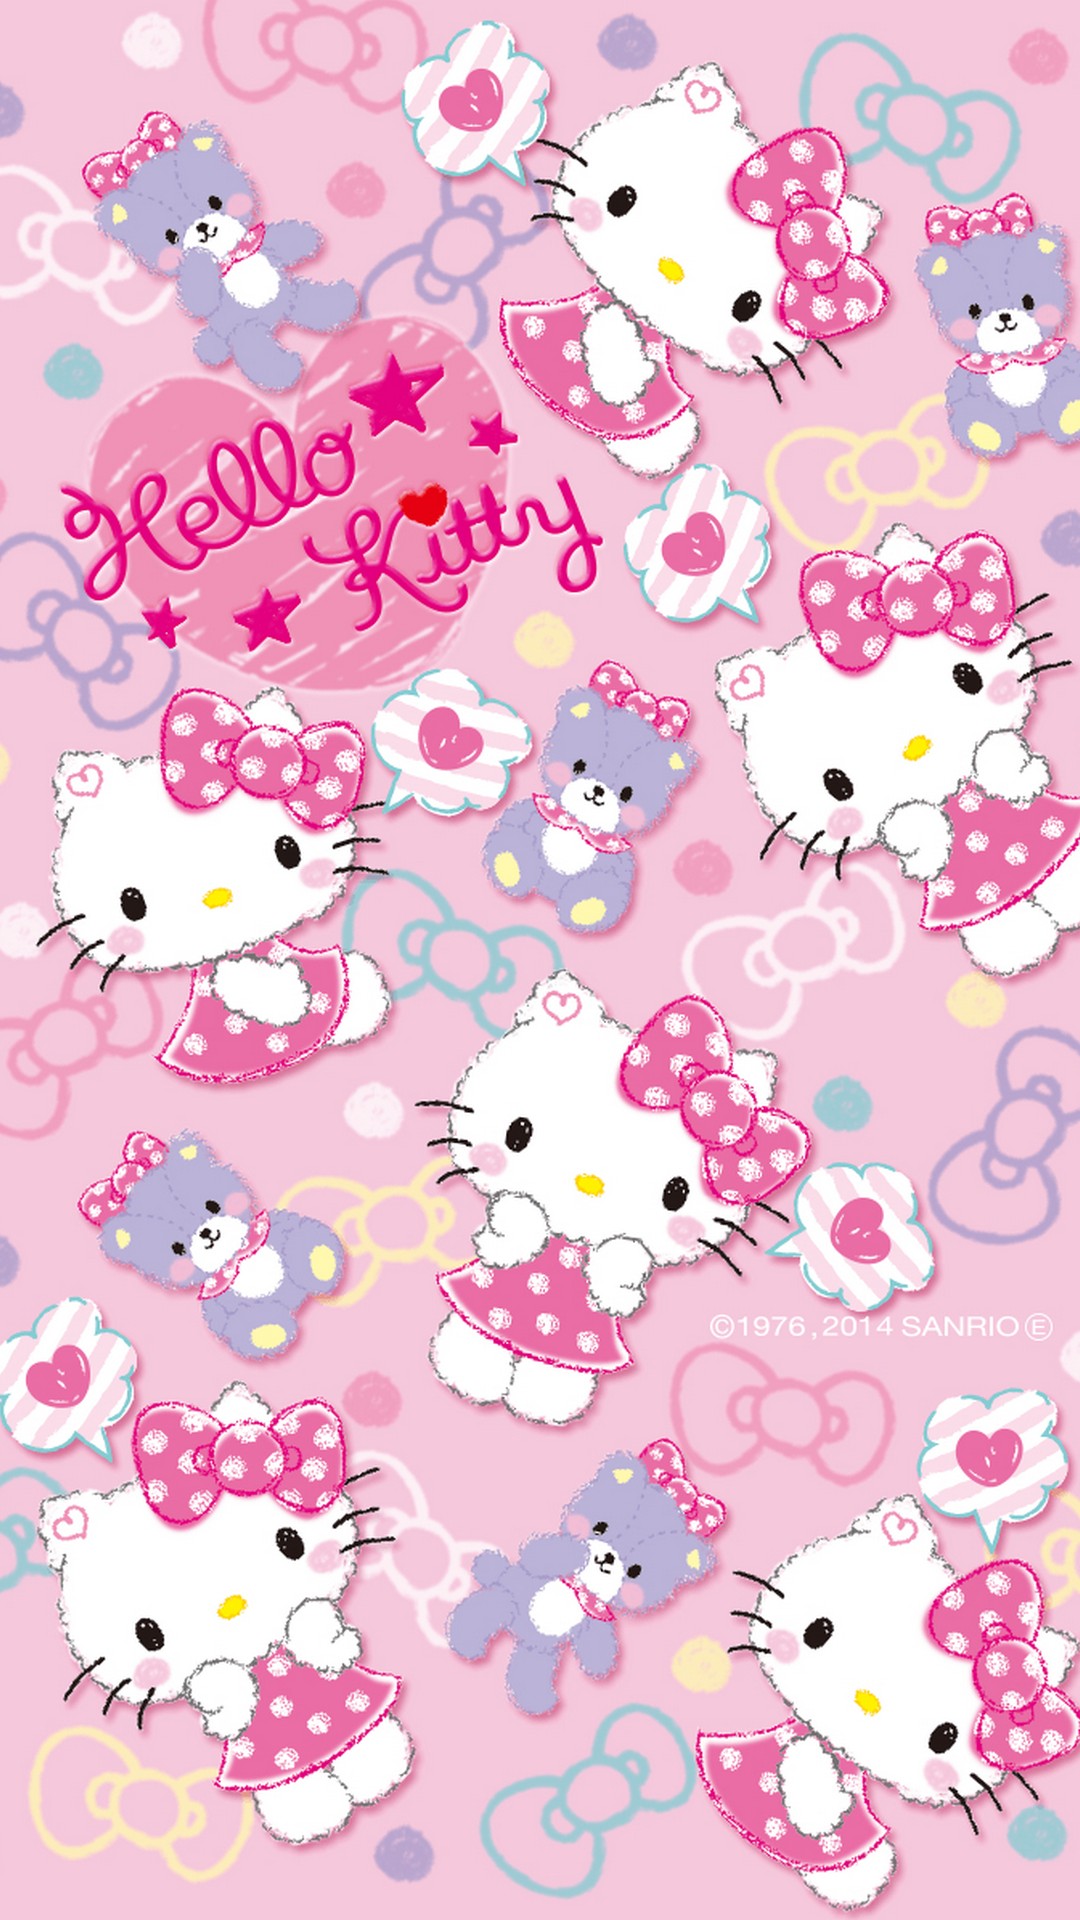 Android Wallpaper HD Hello Kitty Characters with image resolution 1080x1920 pixel. You can make this wallpaper for your Android backgrounds, Tablet, Smartphones Screensavers and Mobile Phone Lock Screen